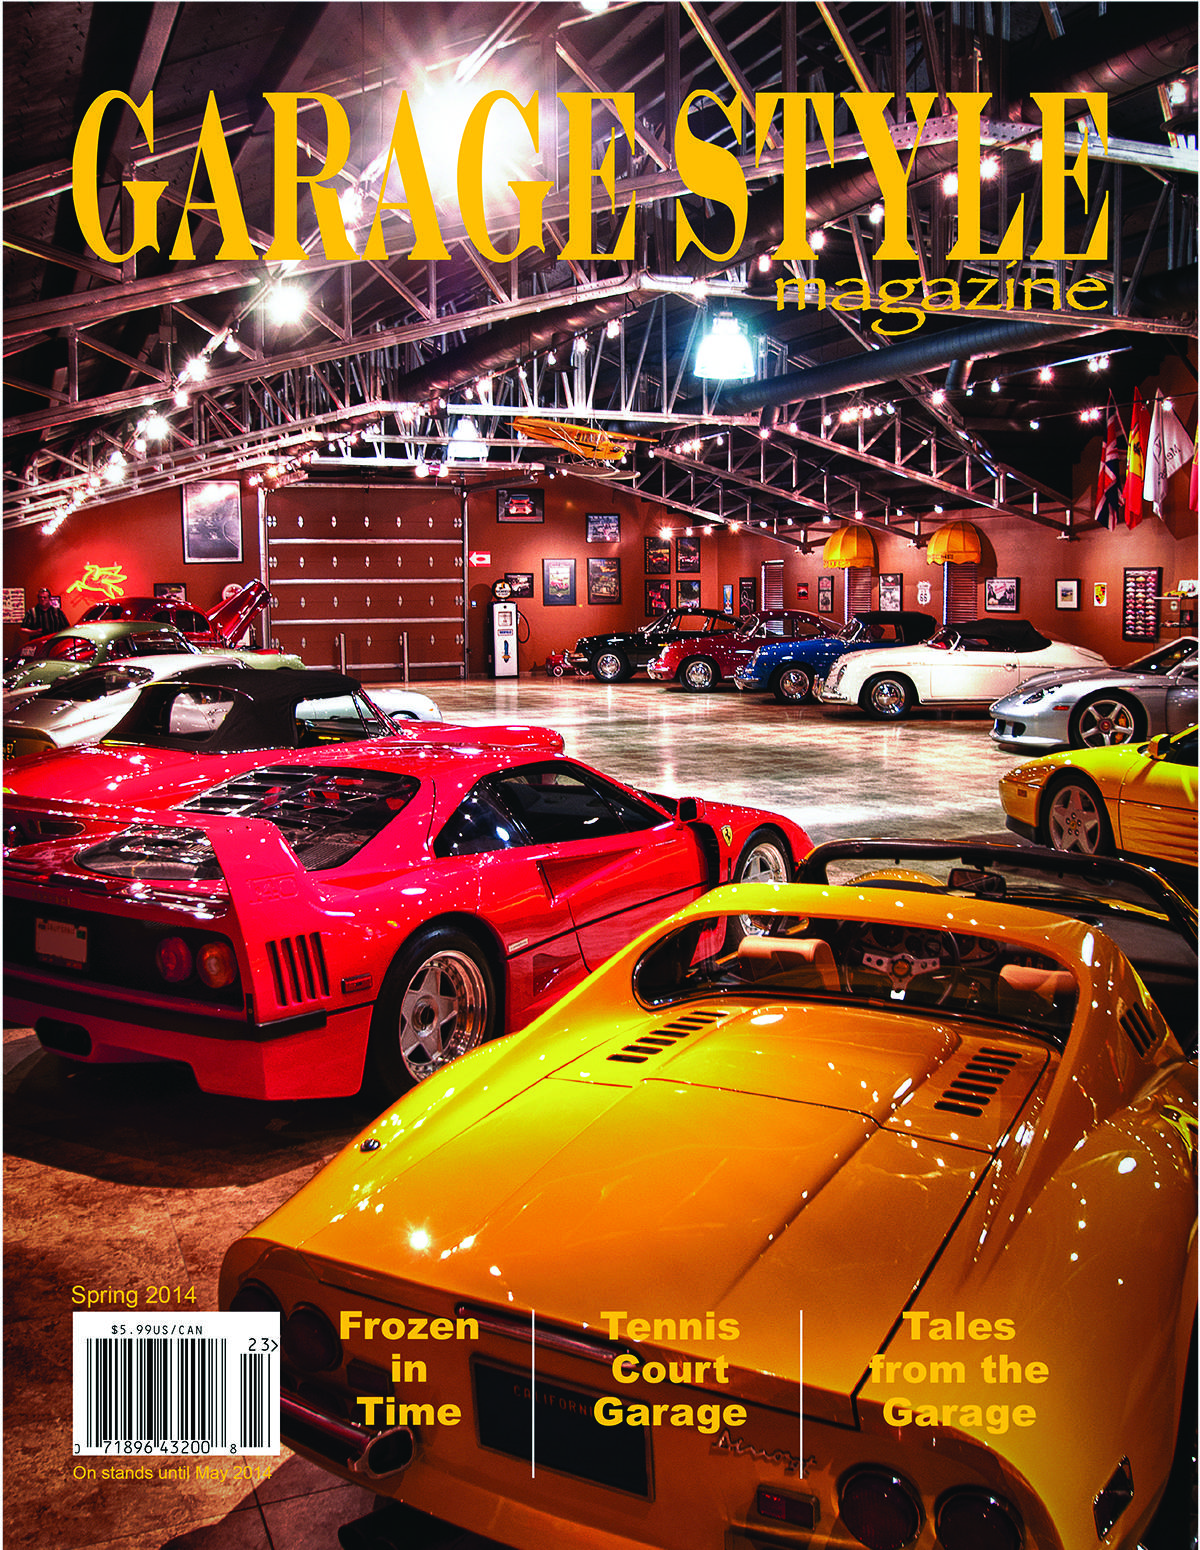 Issue 24, Cover